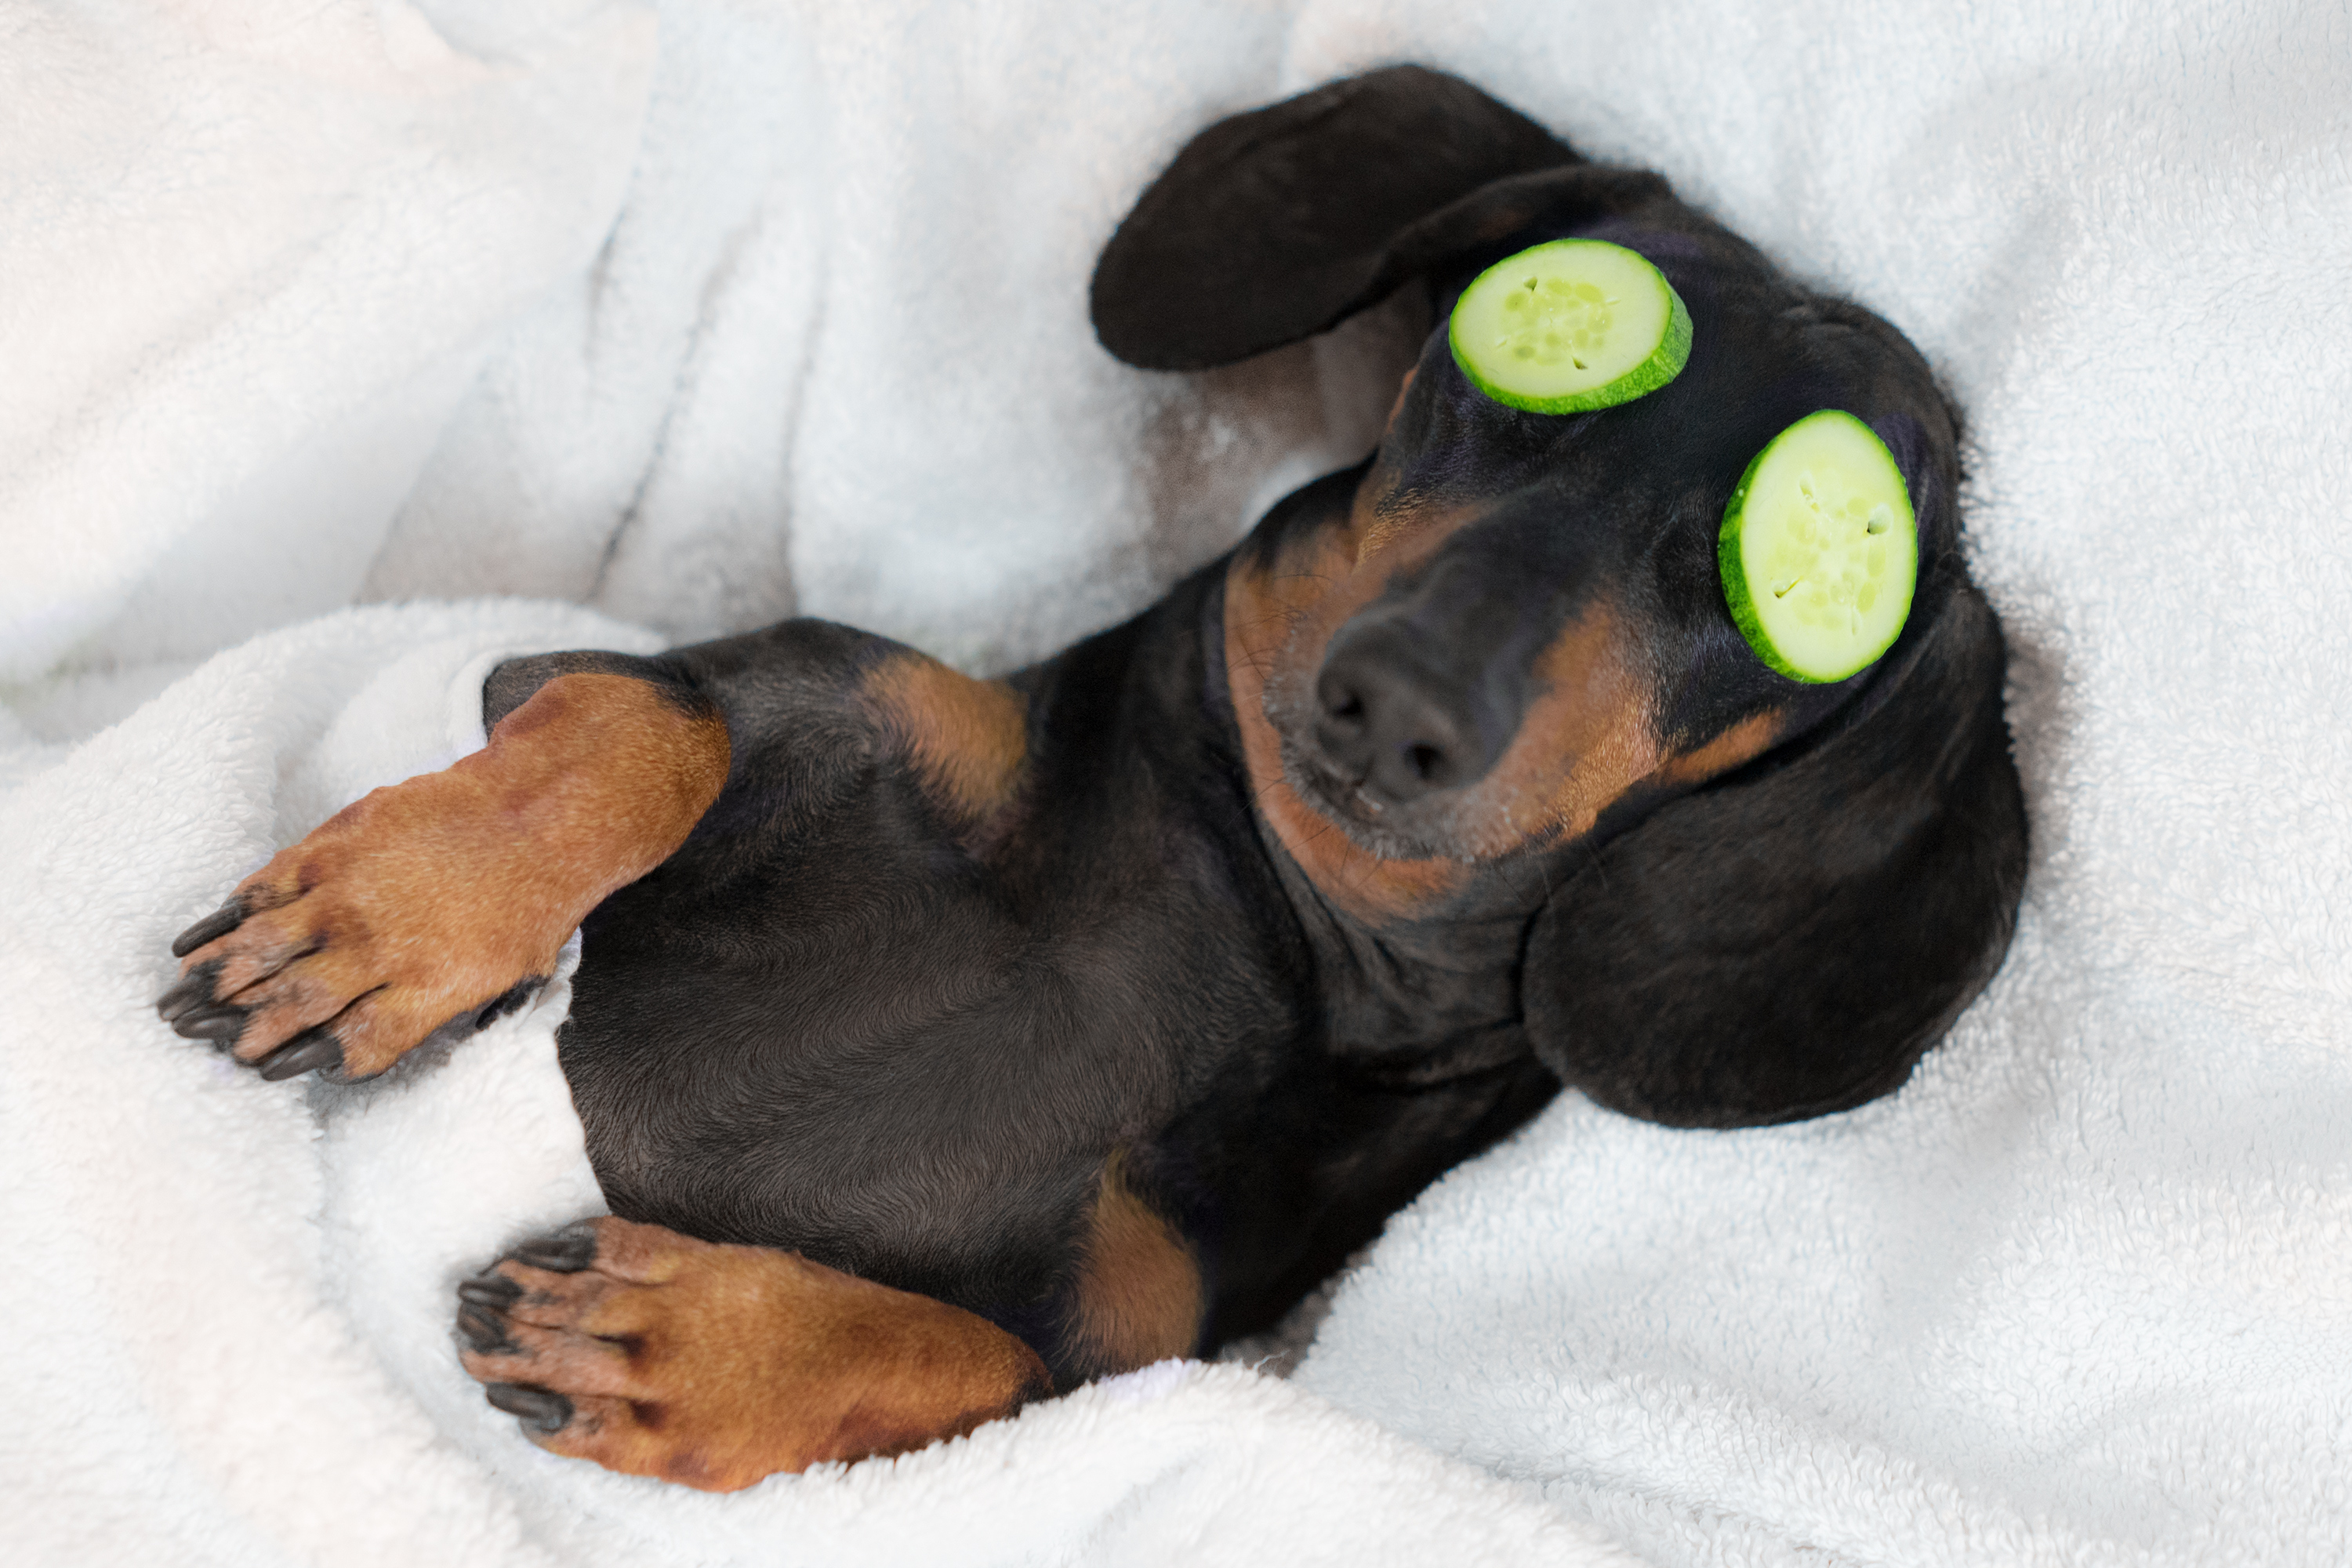 A dog is being pampered with cucumbers on its eyes